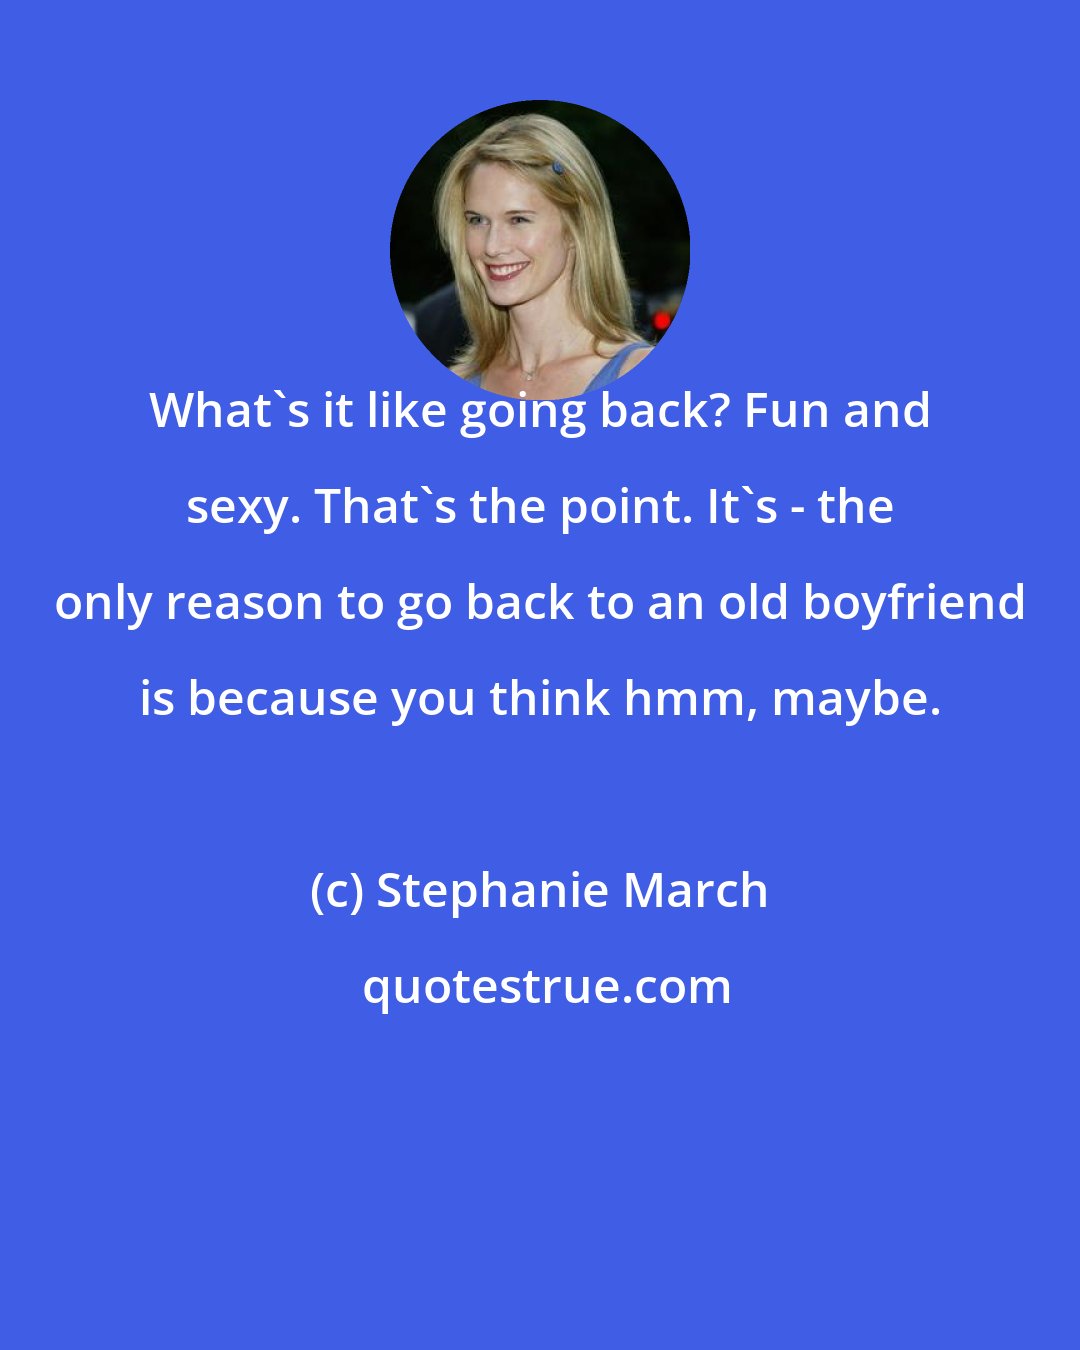 Stephanie March: What's it like going back? Fun and sexy. That's the point. It's - the only reason to go back to an old boyfriend is because you think hmm, maybe.